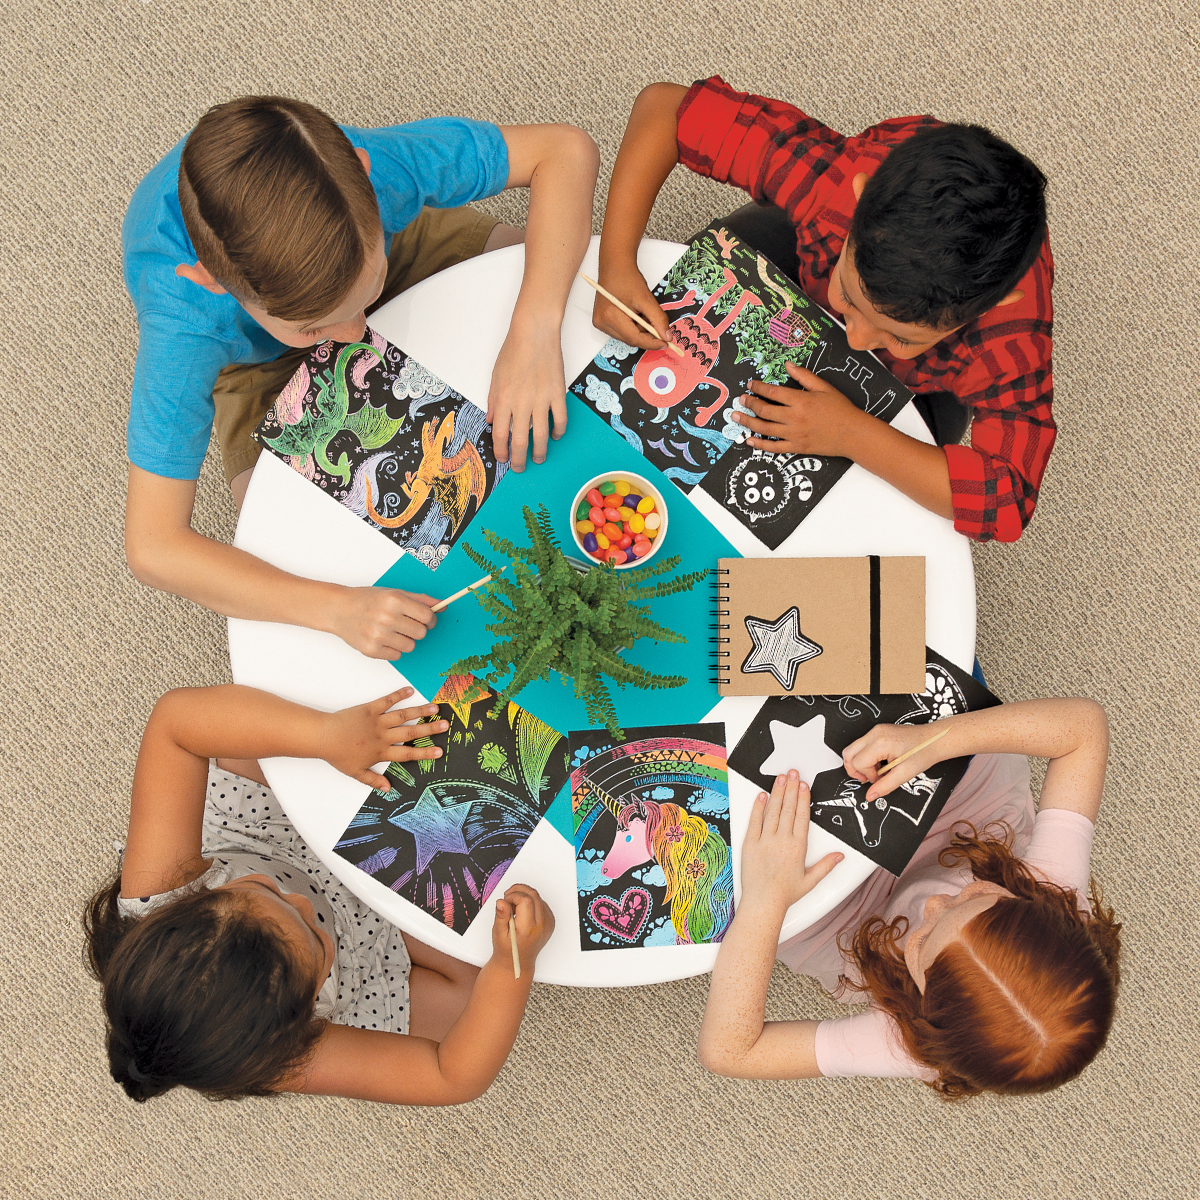 Group of kids at a table with Scratch and Scribble scratch art kits